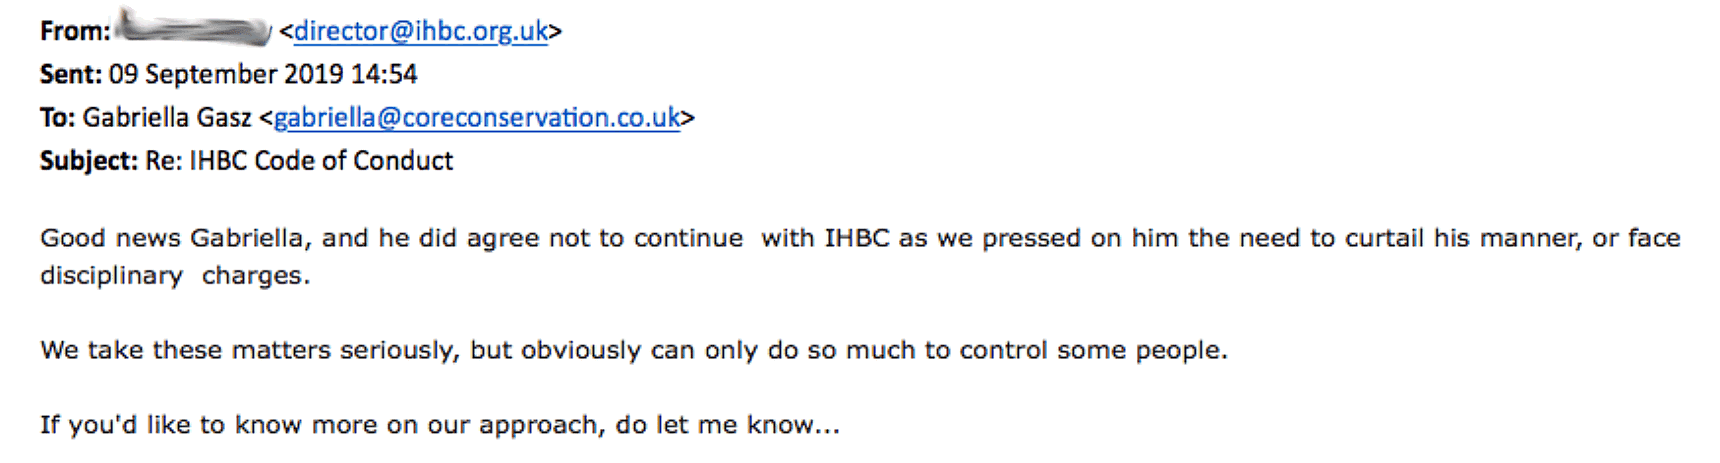 IHBC kicked out member